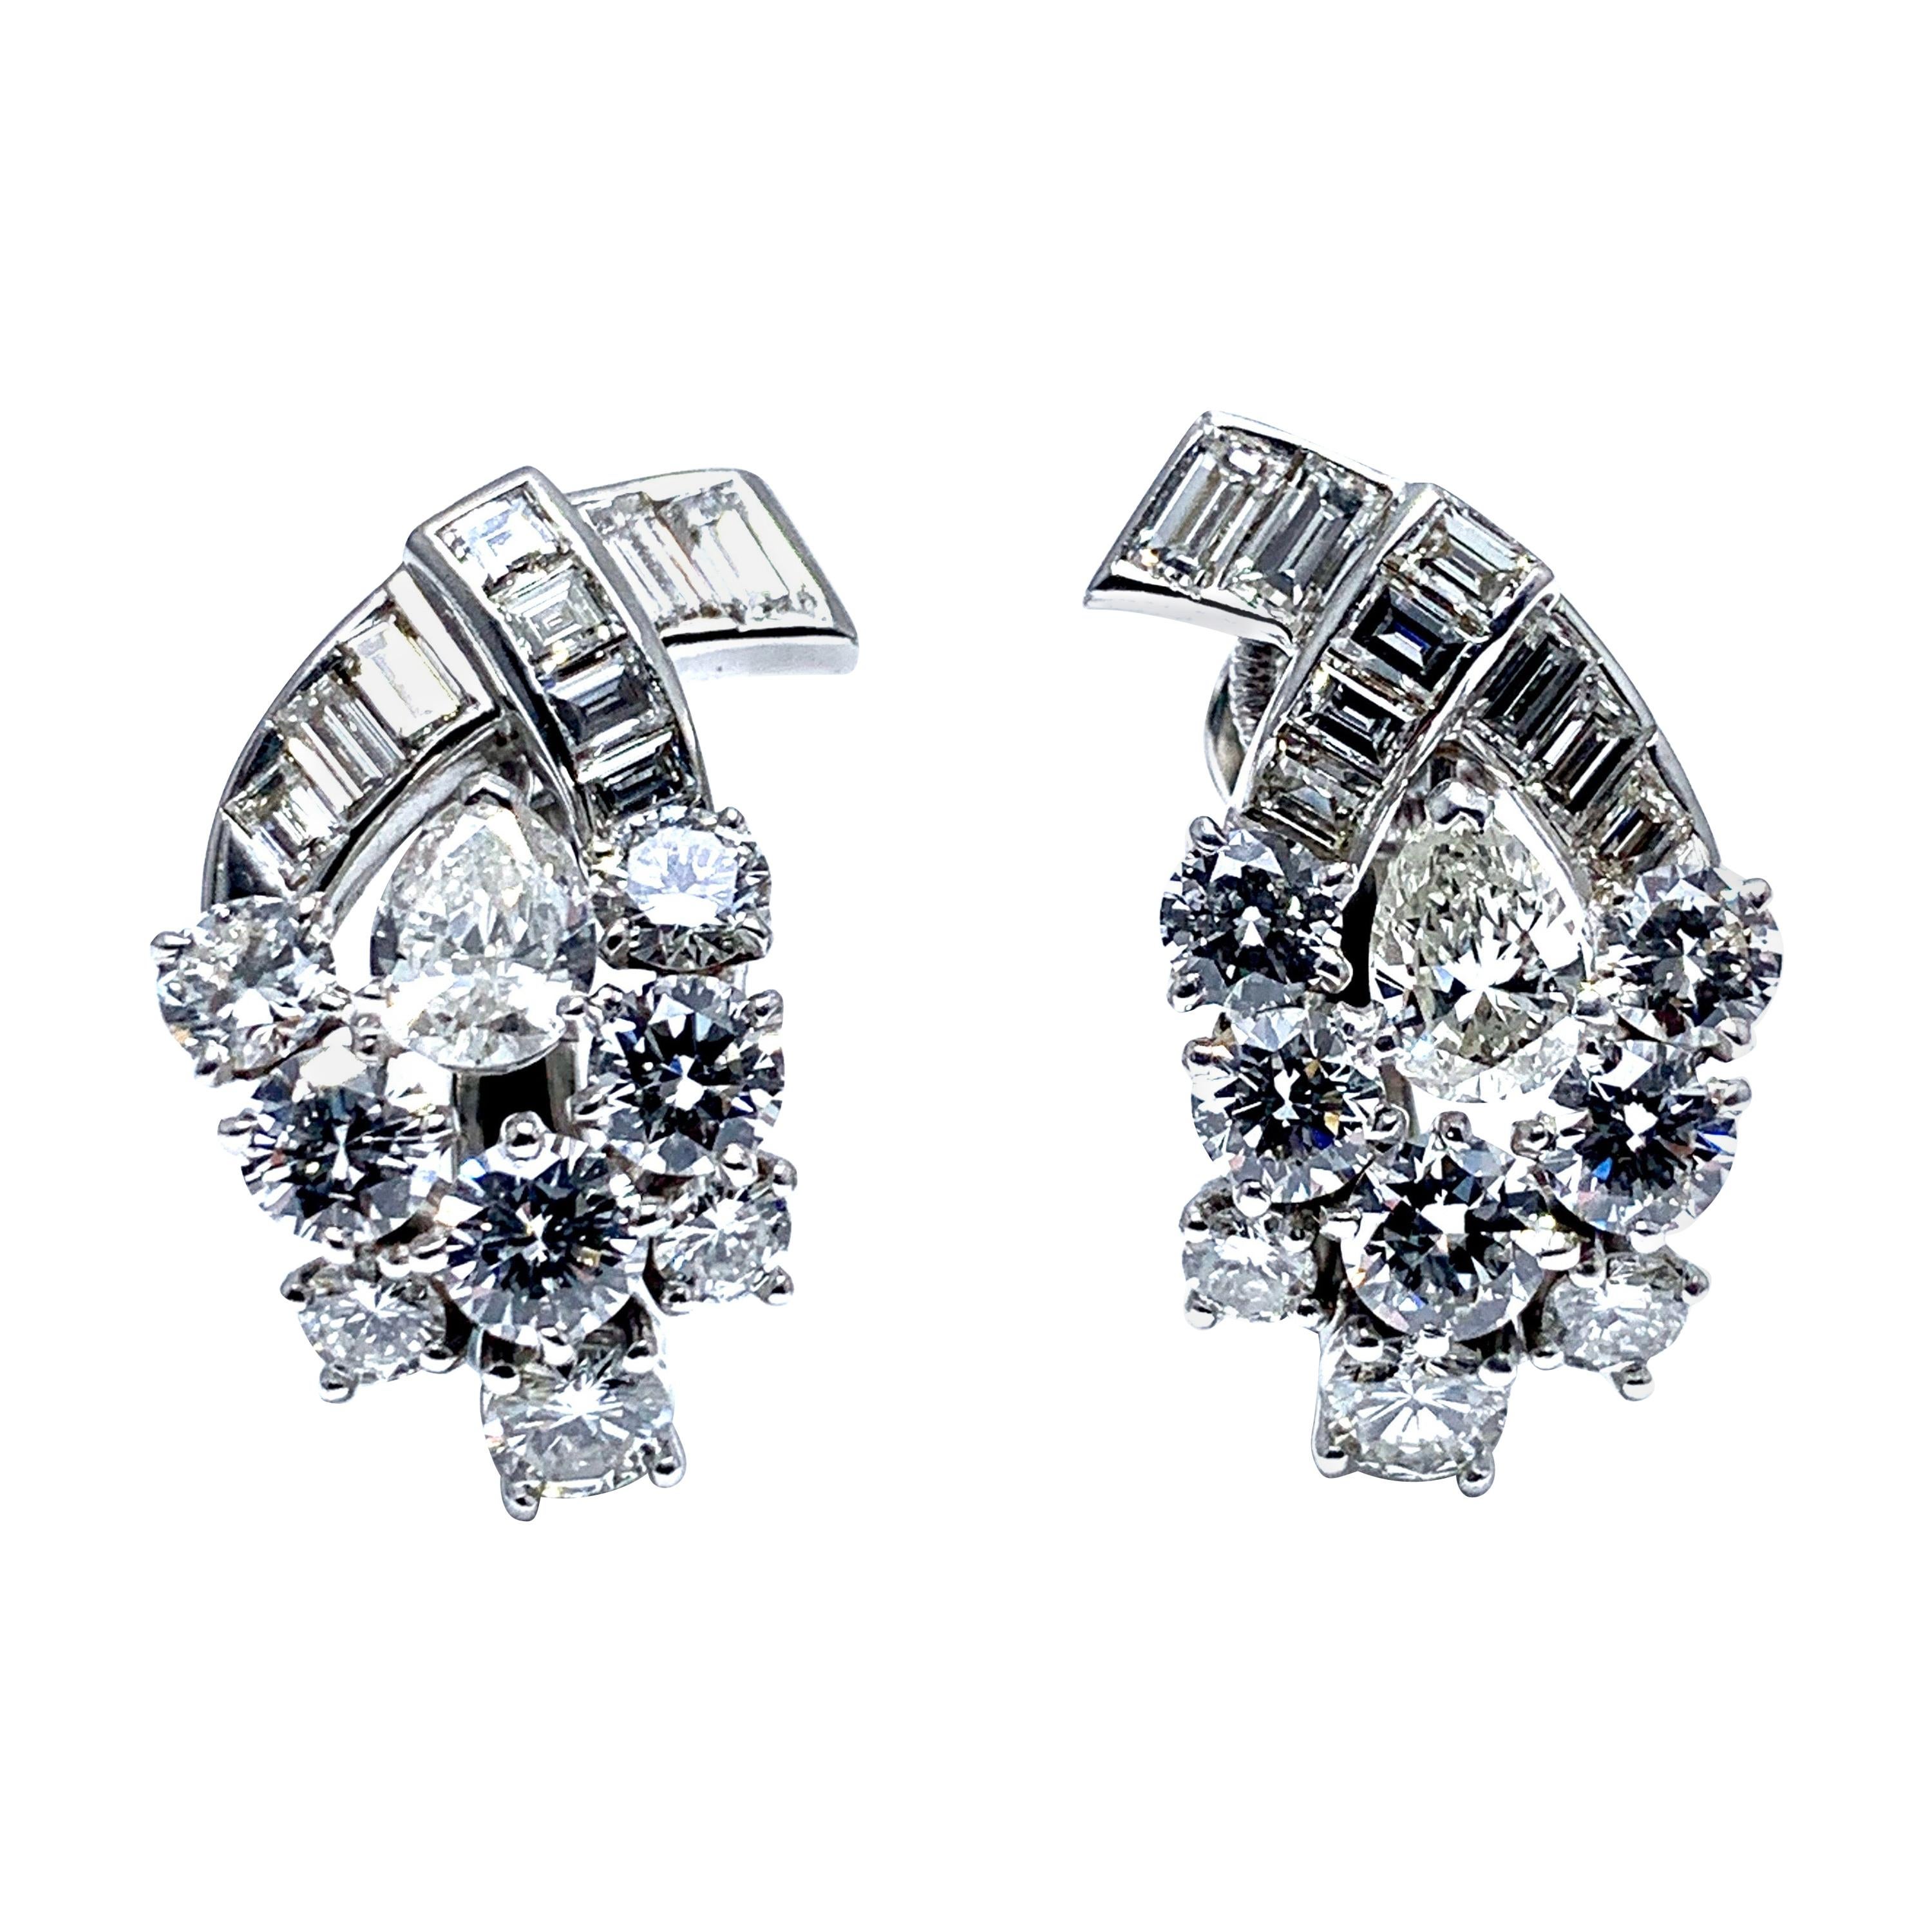 5.32 Carat Diamond and Platinum Clip Earrings For Sale